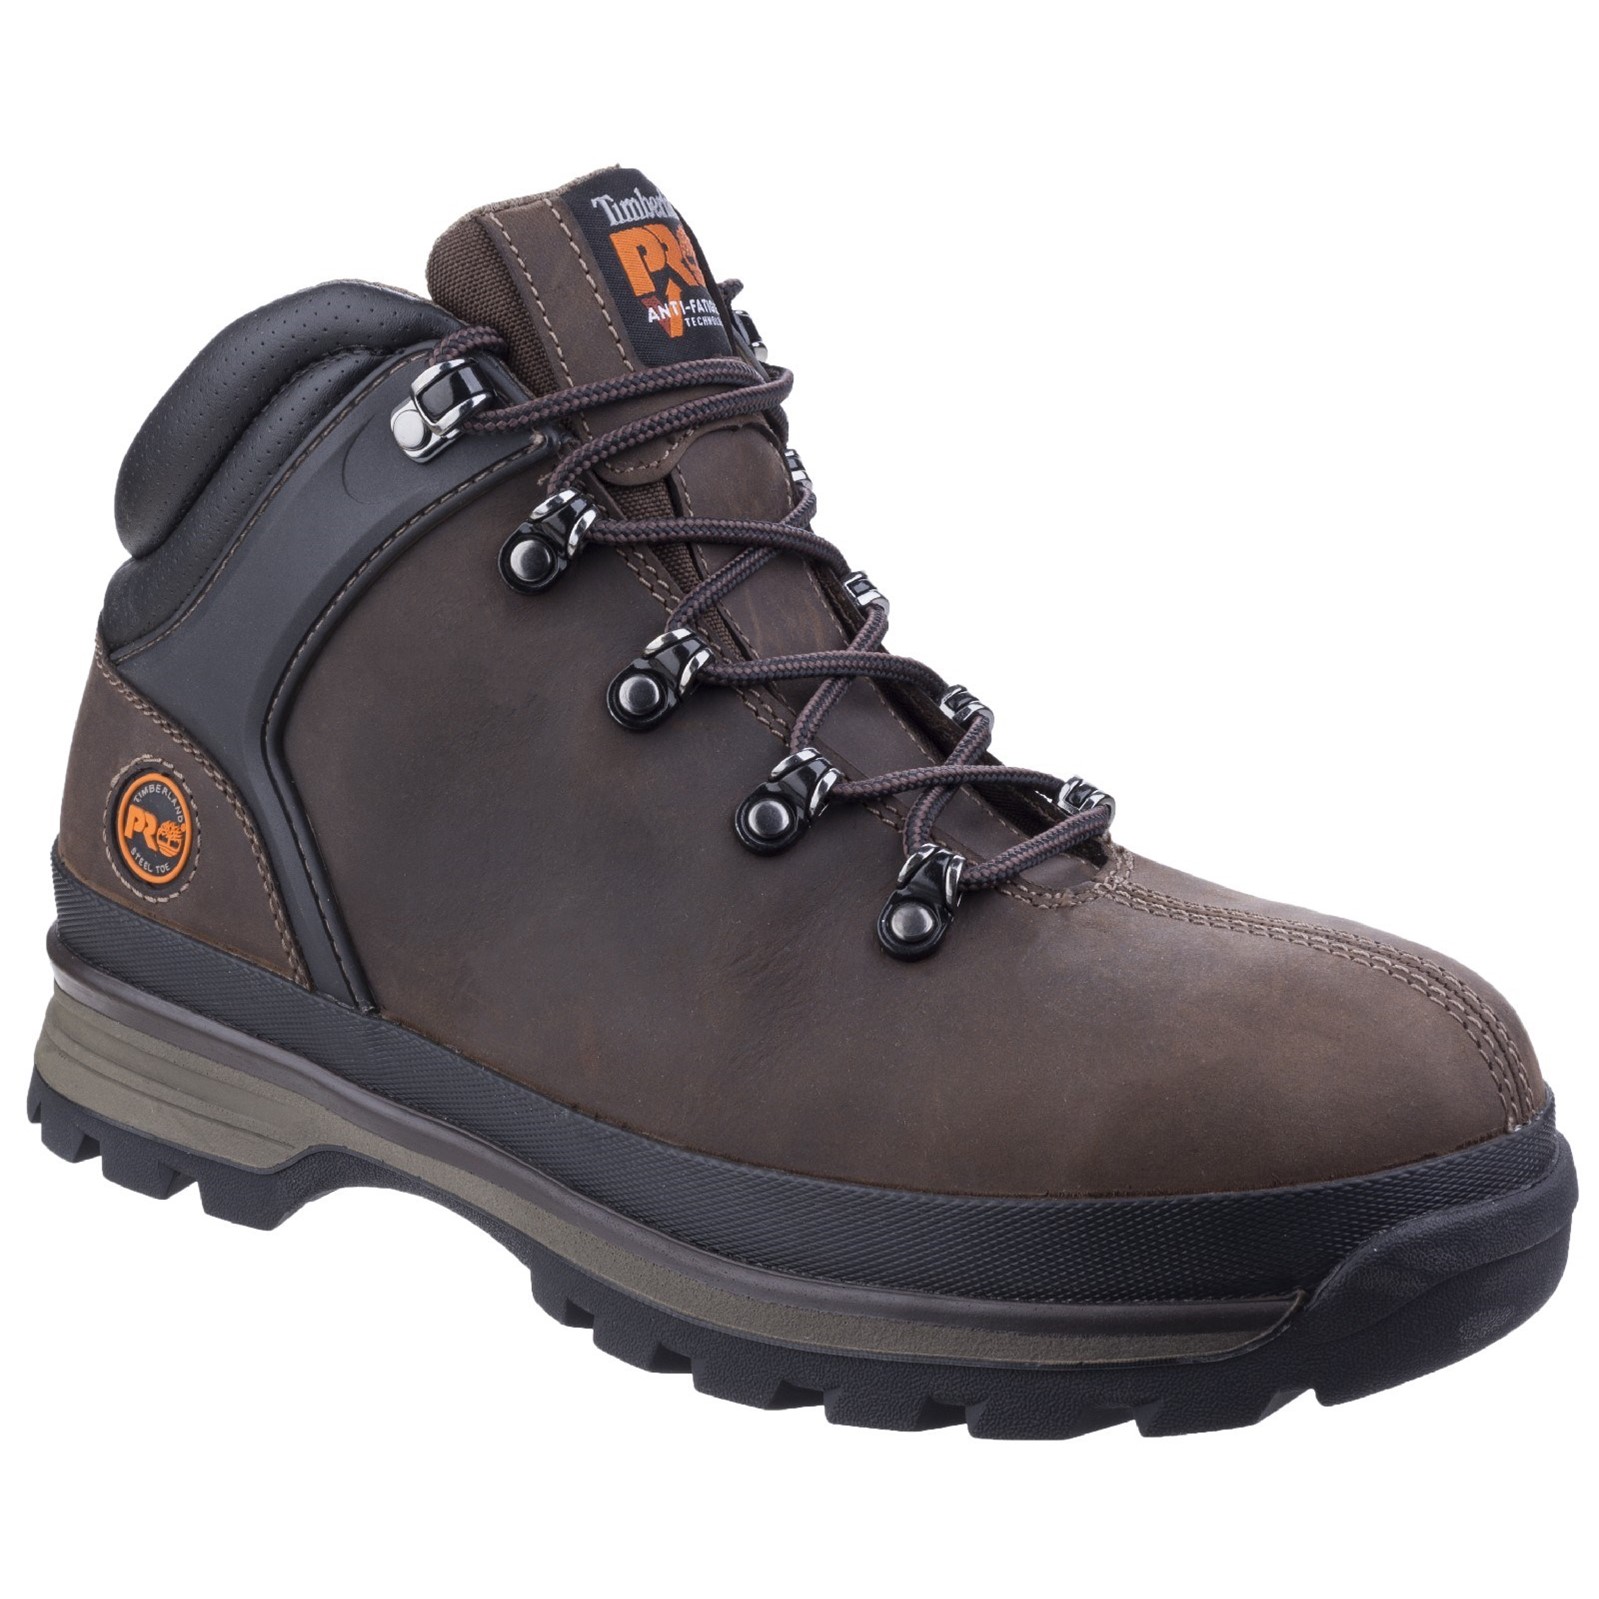 Splitrock XT Lace-up Safety Boot Gaucho